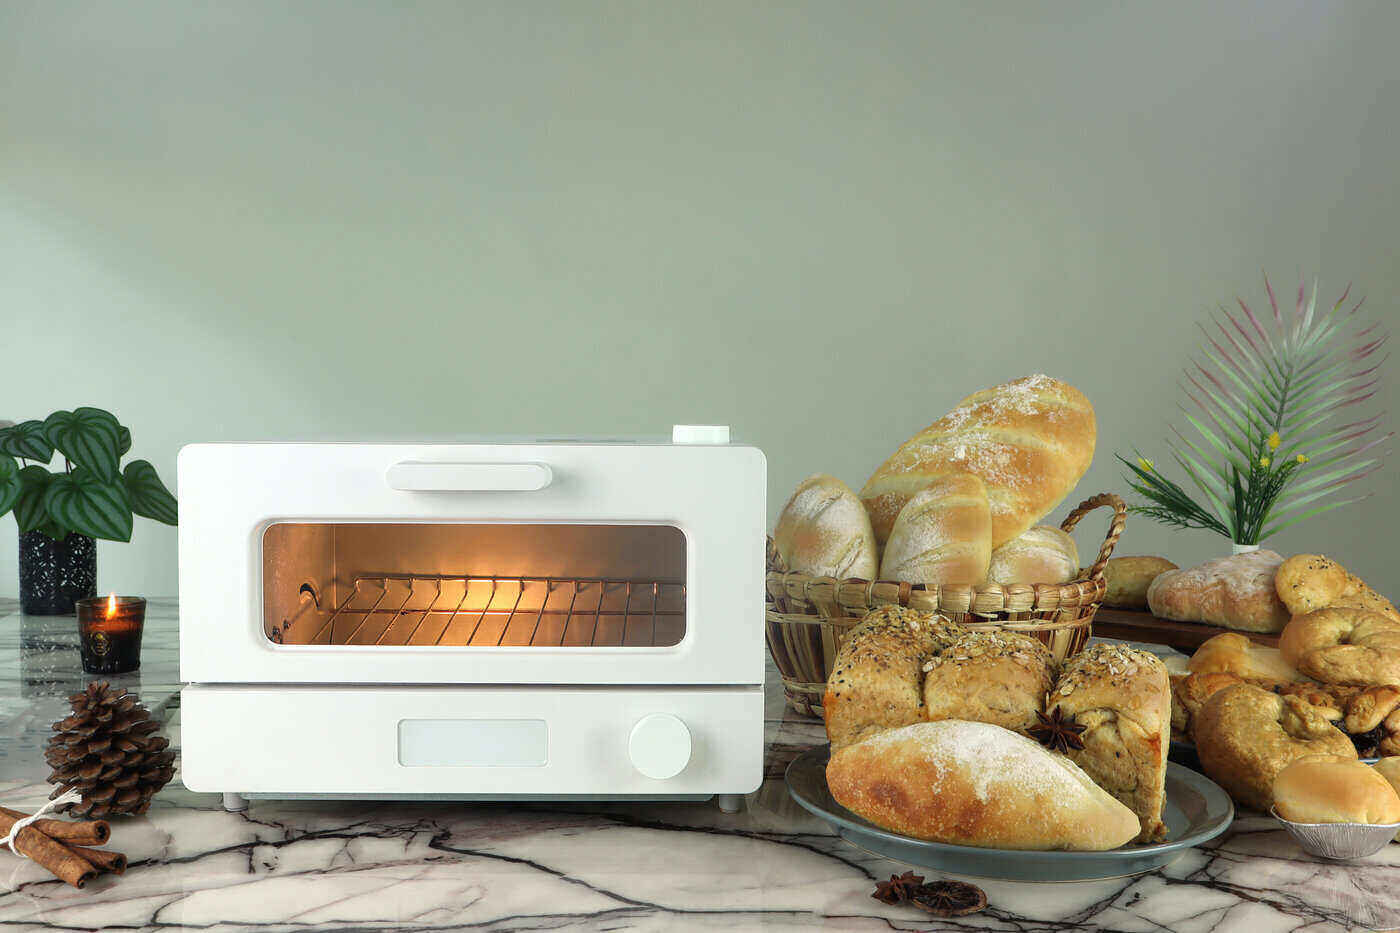 white toaster oven with baskets of bread - best toaster oven reviews and buying guide